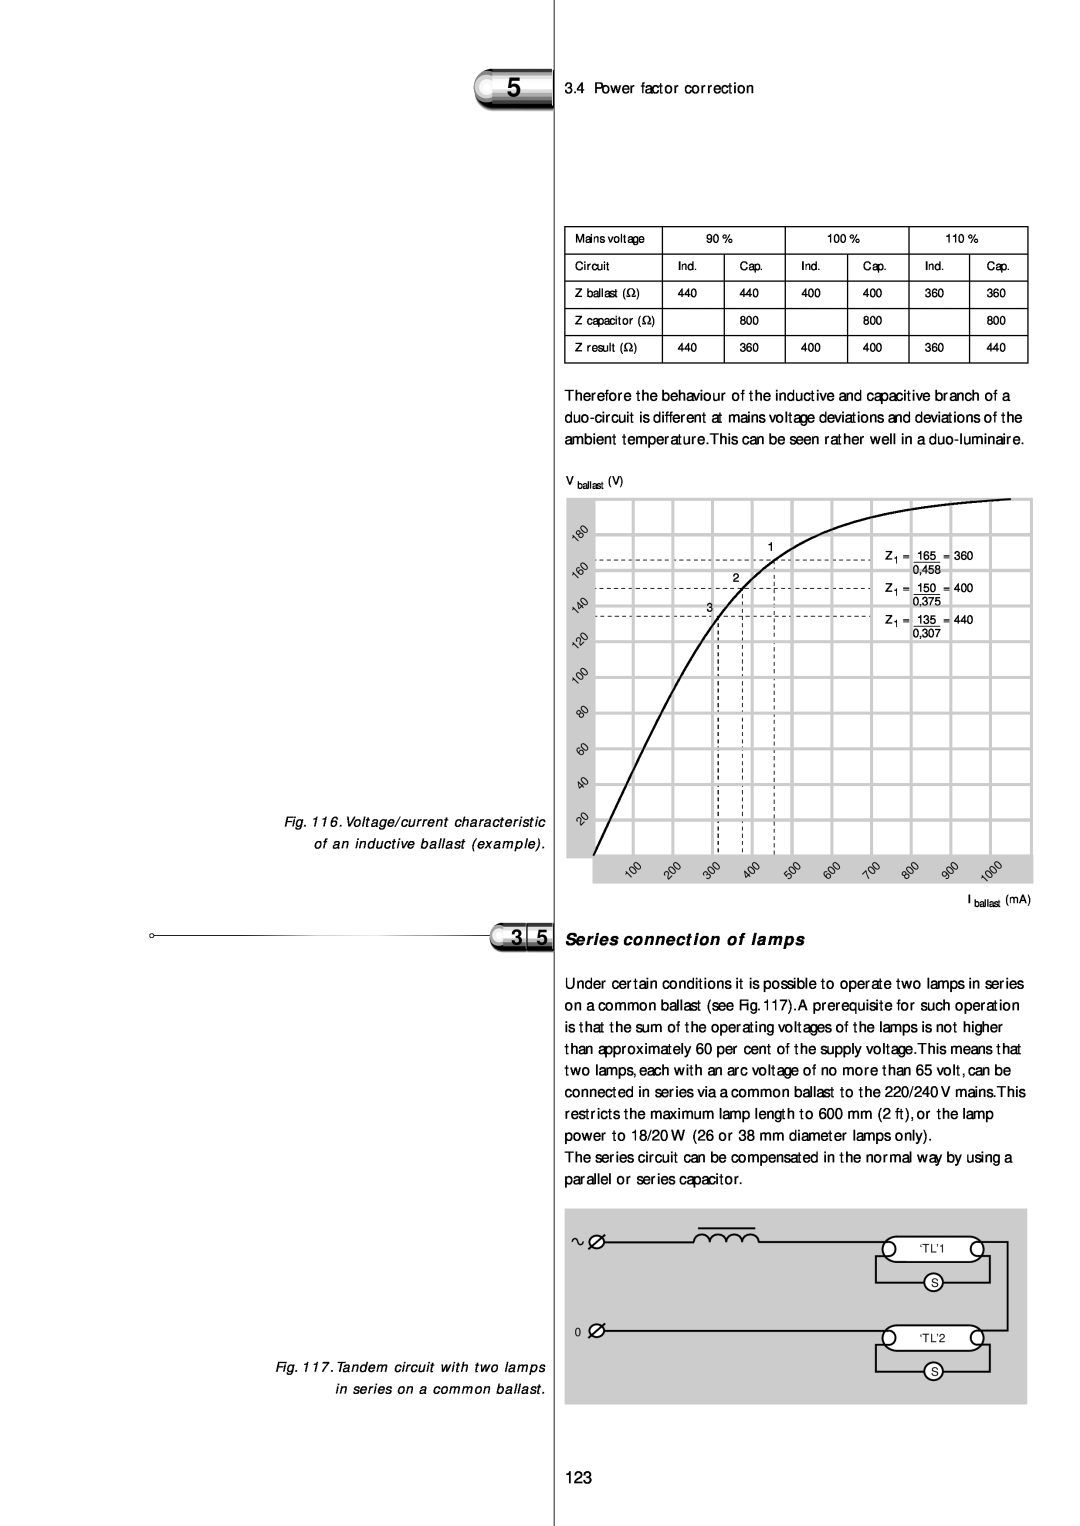 Philips Electromagnetic Lamp manual 3 5 Series connection of lamps, Power factor correction 